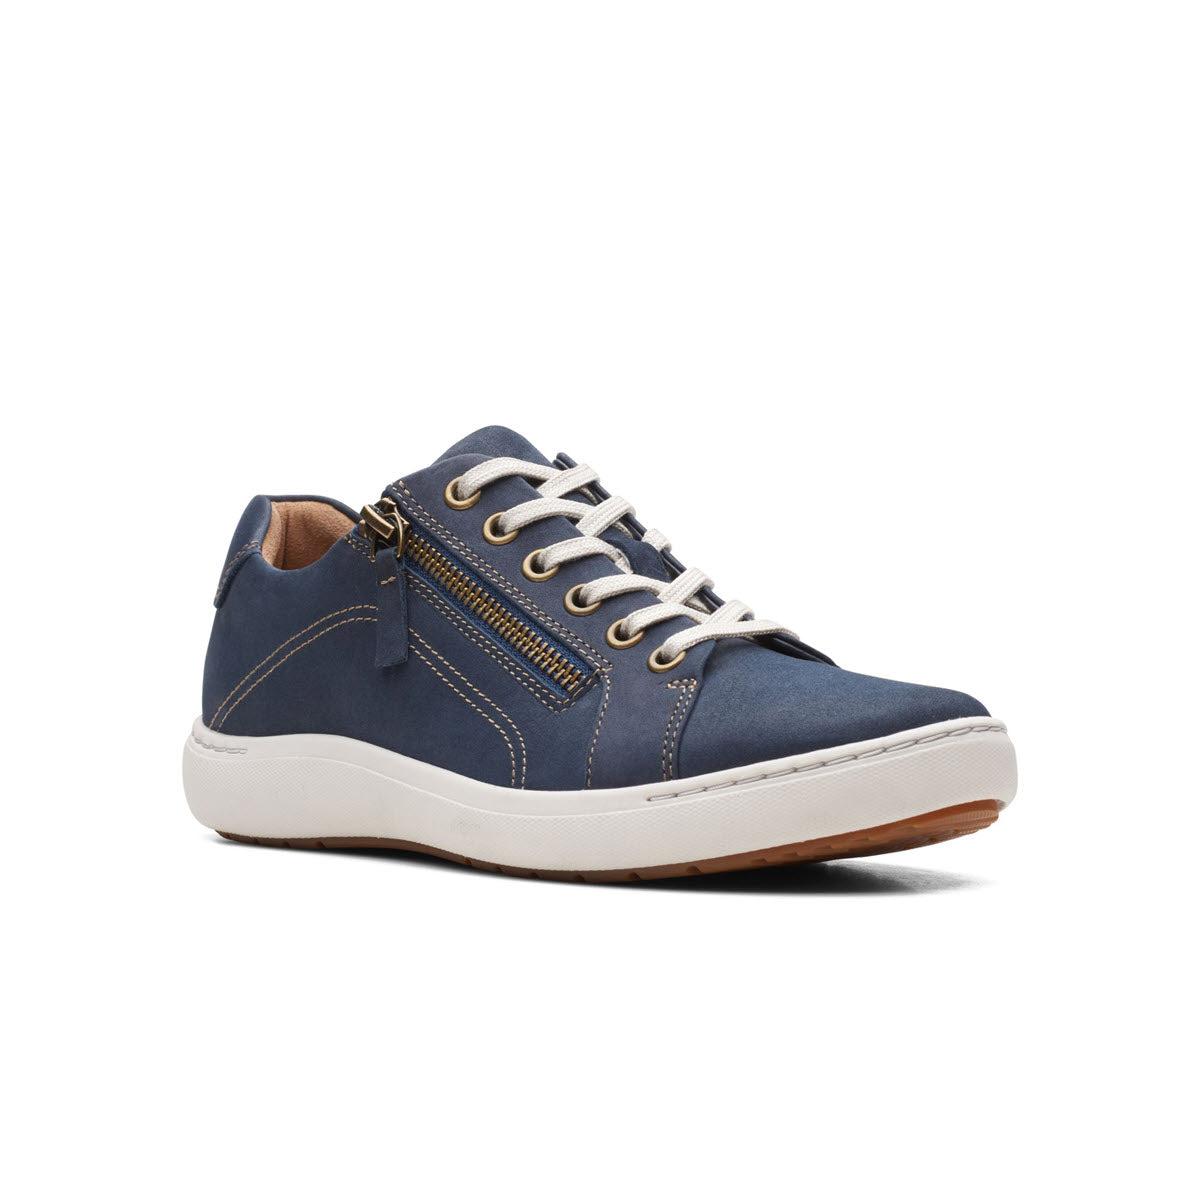 A single navy blue Clarks Nalle Lace sneaker with white soles and brown leather detailing, displayed against a white background.